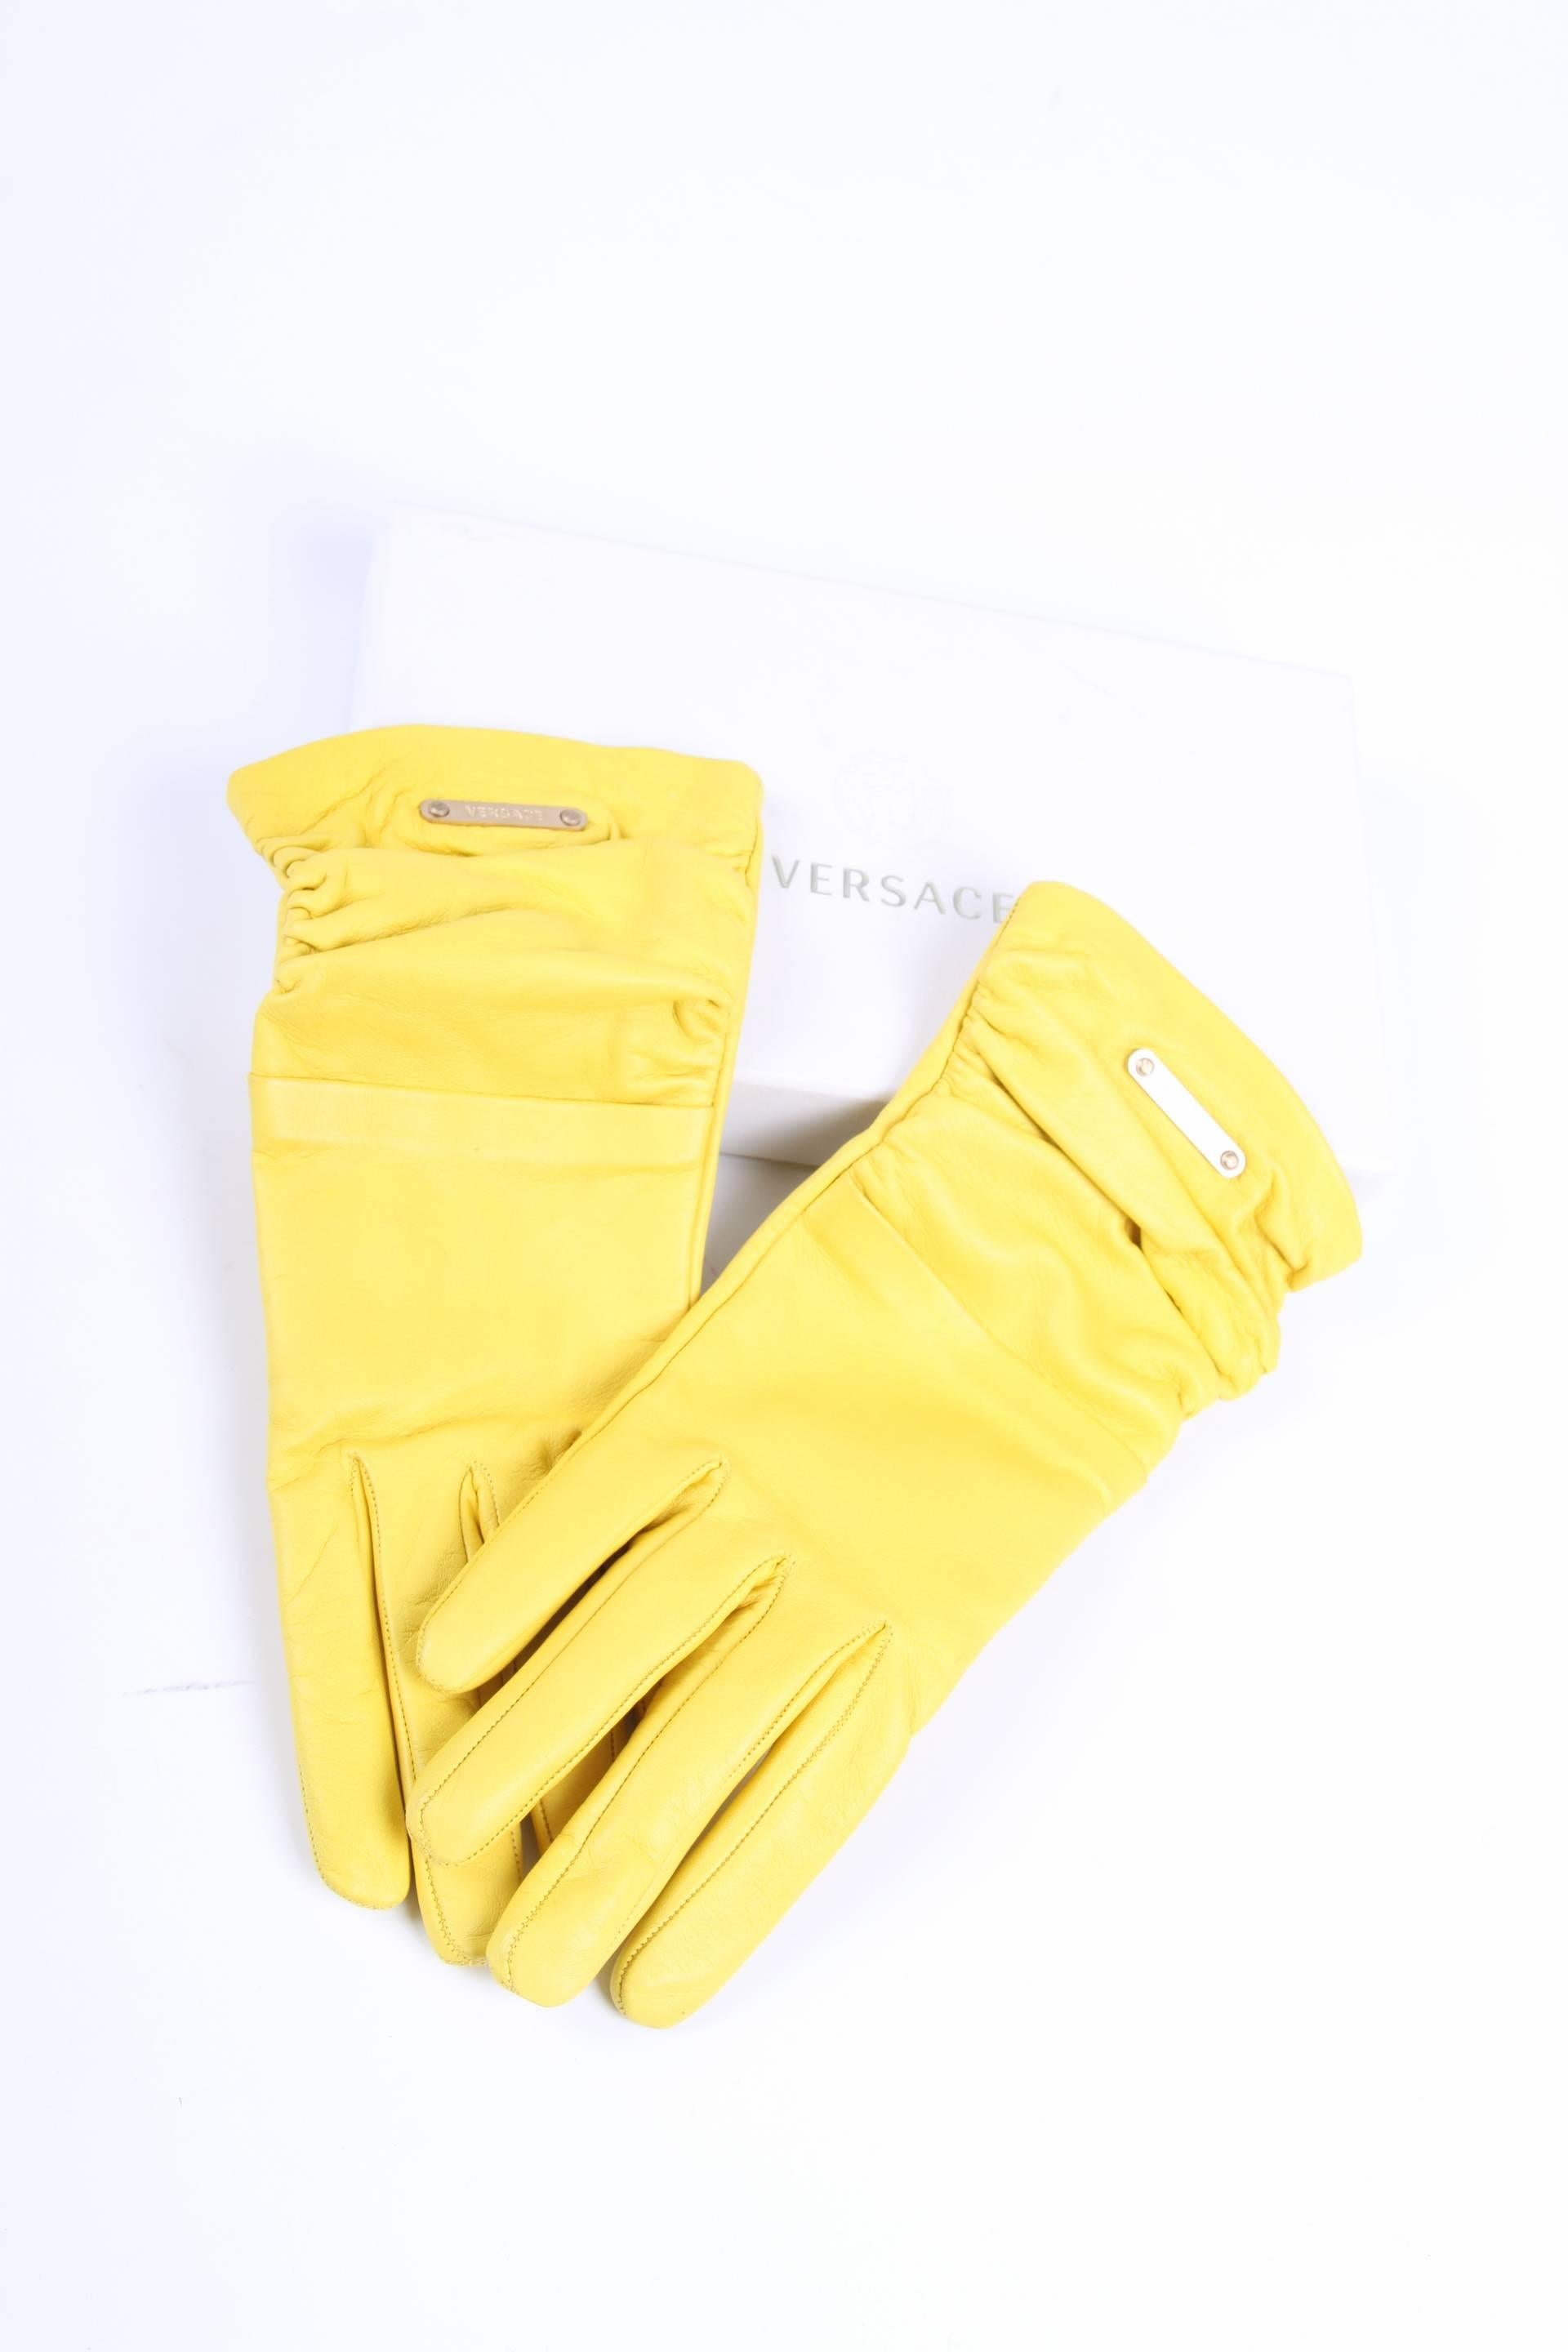 Outstanding pair of gloves by Versace crafted in bright yellow leather.

Embellished with pleats and a light gold-tone plaque with Versace logo. Lining in 100% silk in a beige color.

New! Comes with little box.

Size: S

Made in Italy.